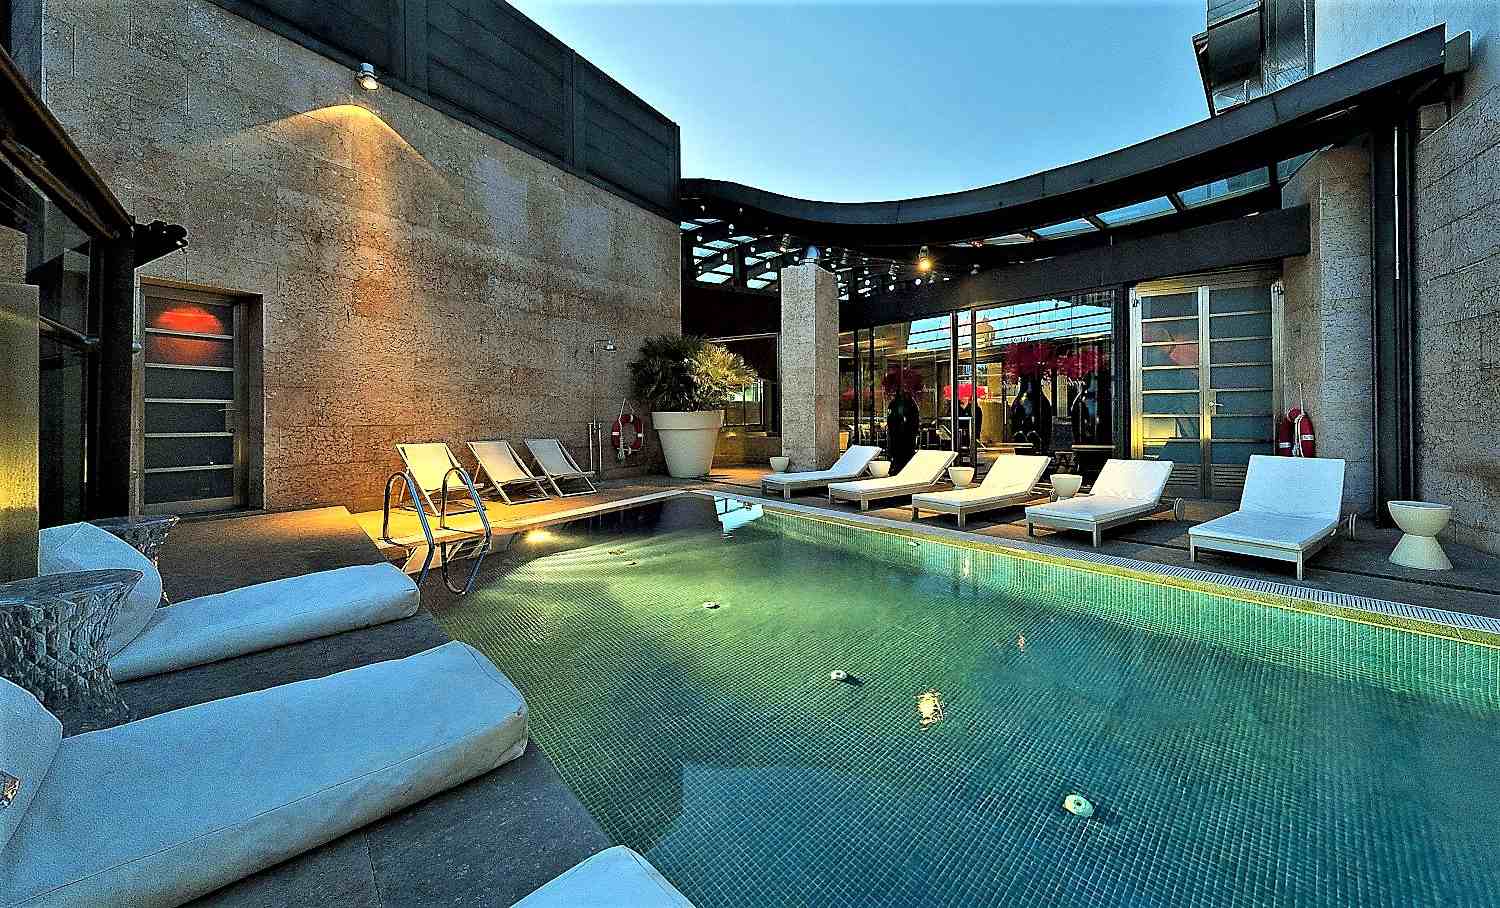 Pool at a roof top terrace at hotel in spain